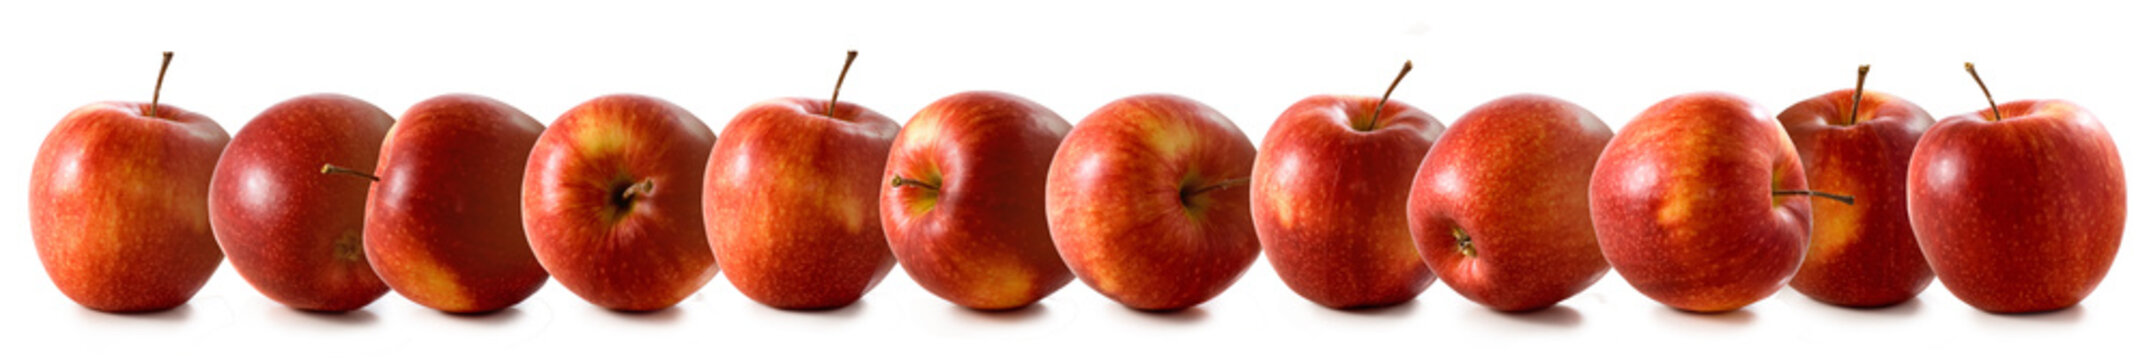 close-up isolated image of apples on a white background